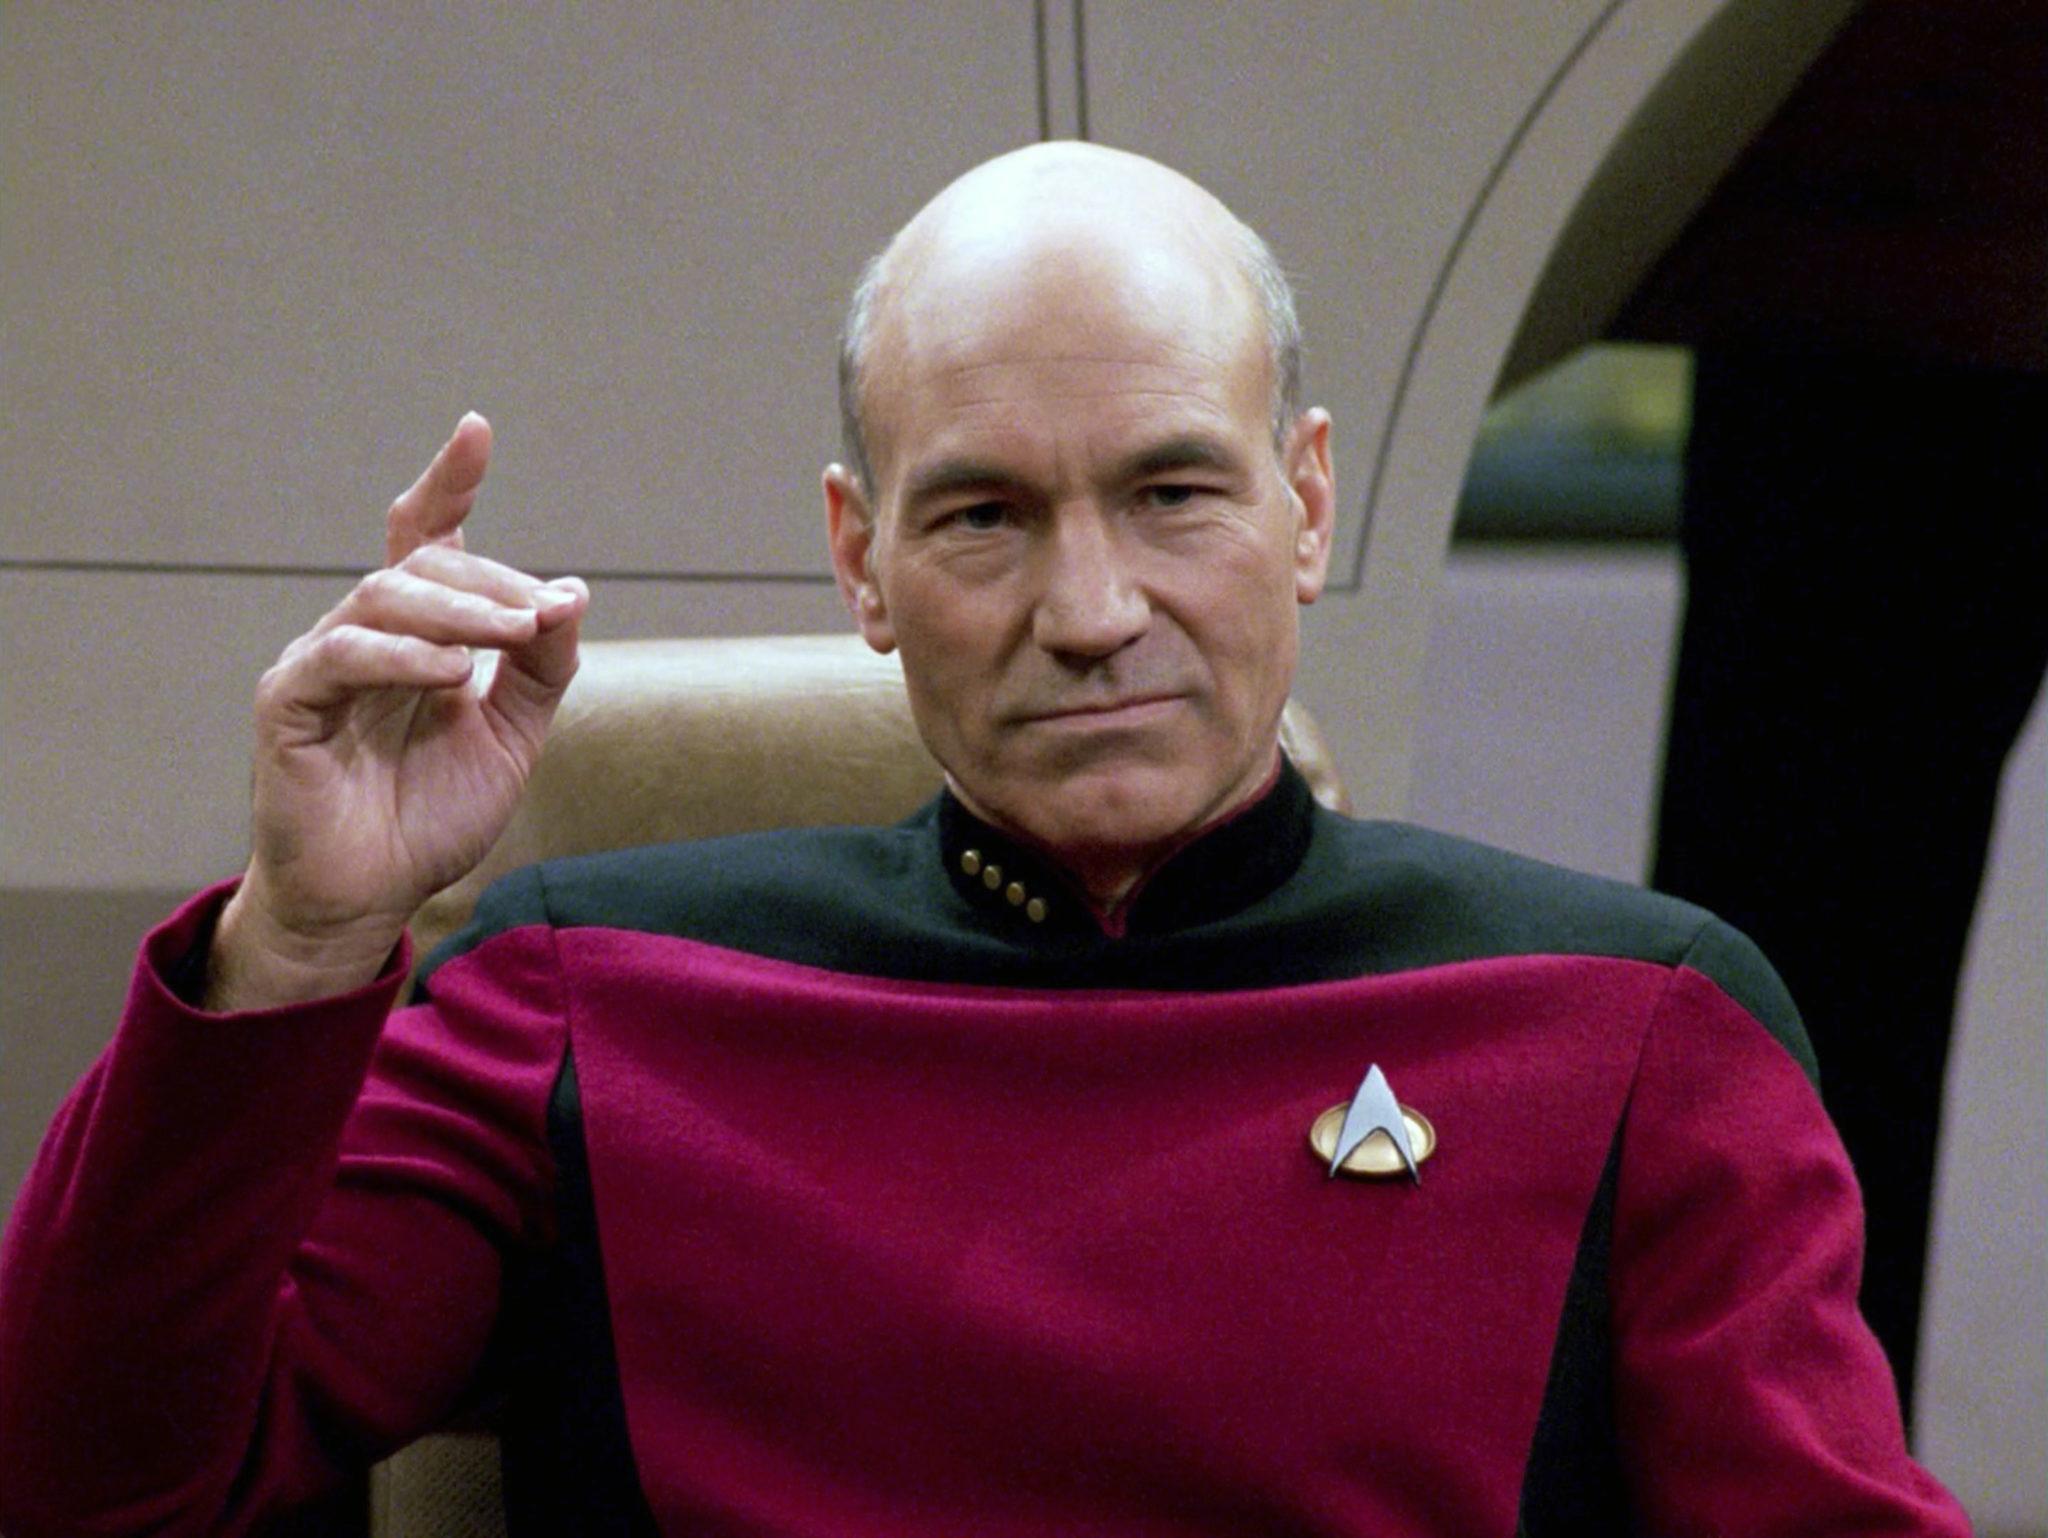 Patrick Stewart played Enterprise captain Jean-Luc Picard from 1987 to 2002, and returned to the role in 2020.